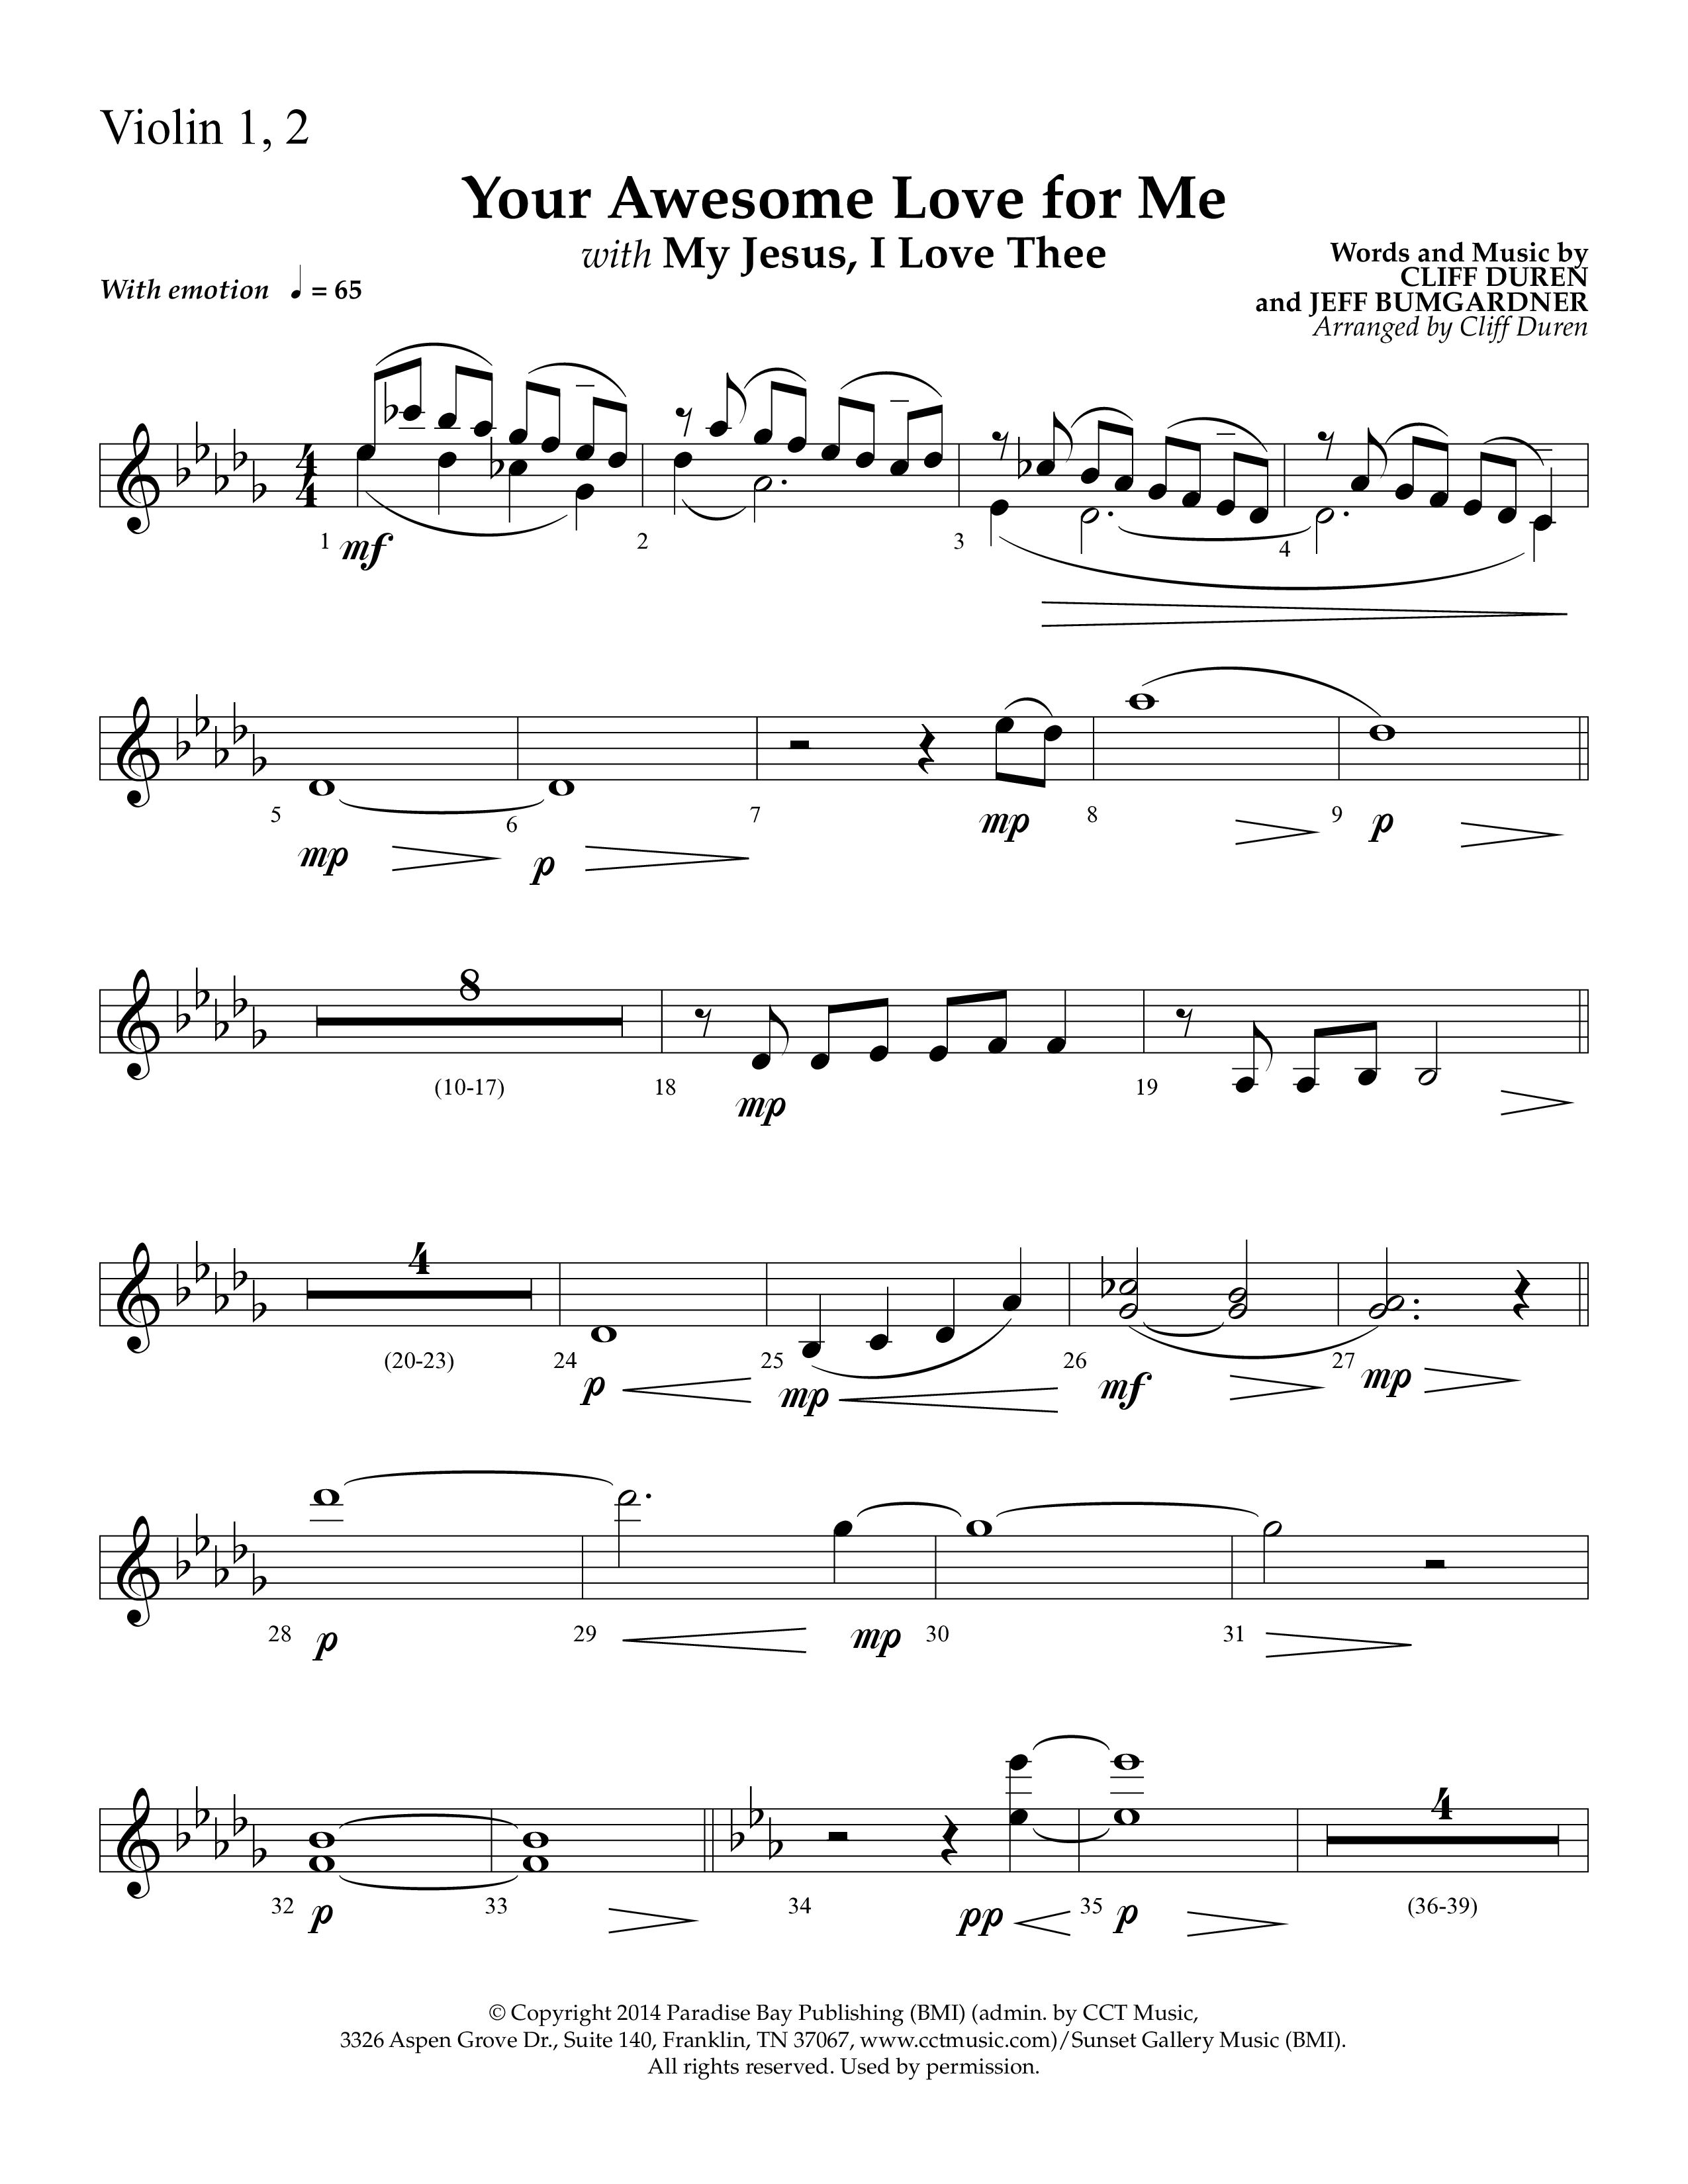 Your Awesome Love For Me (with My Jesus I Love Thee) (Choral Anthem SATB) Violin 1/2 (Lifeway Choral / Arr. Cliff Duren)